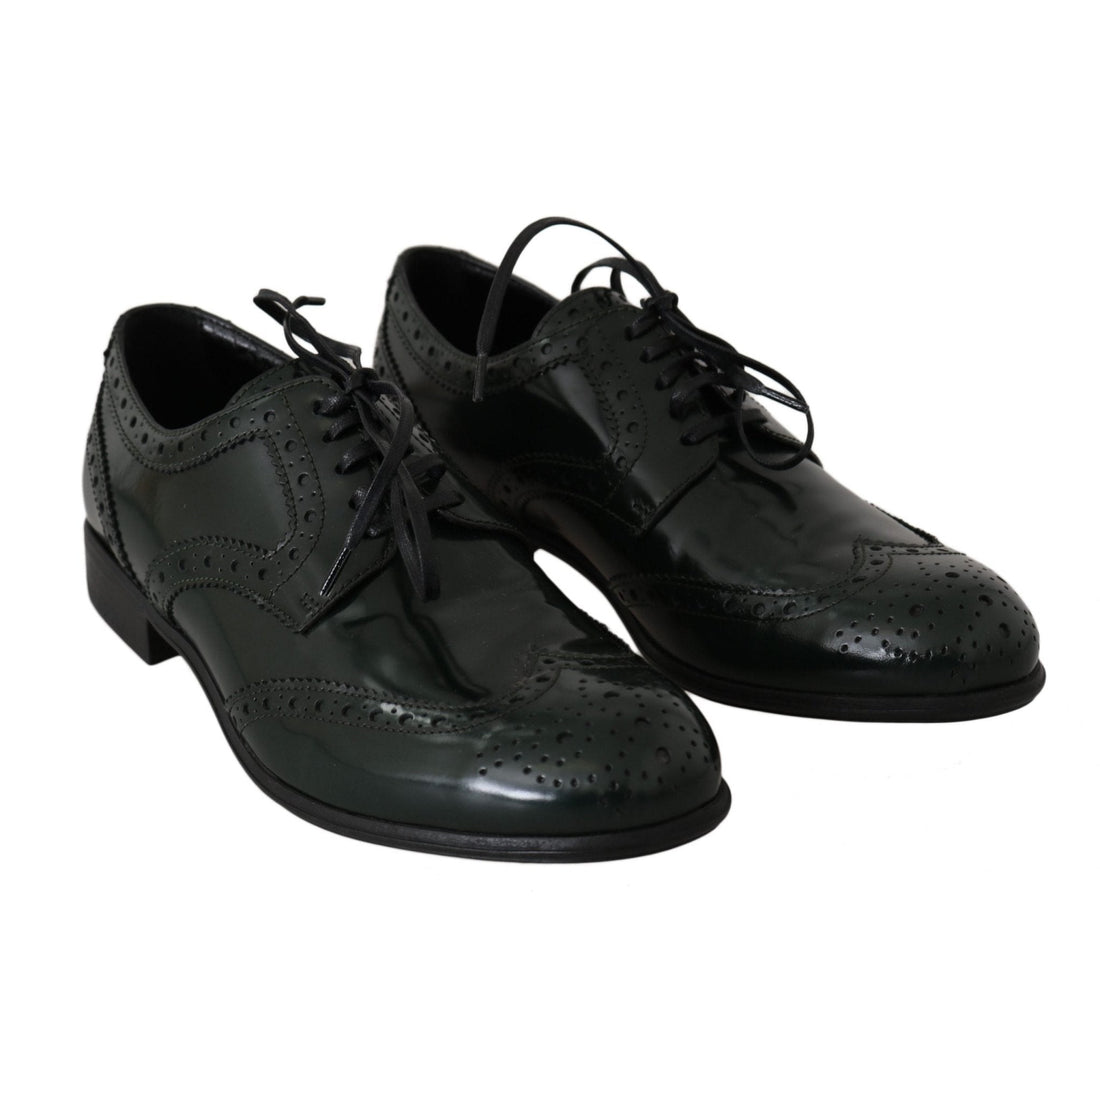 Dolce & Gabbana Green Leather Broque Oxford Wingtip Shoes - Paris Deluxe